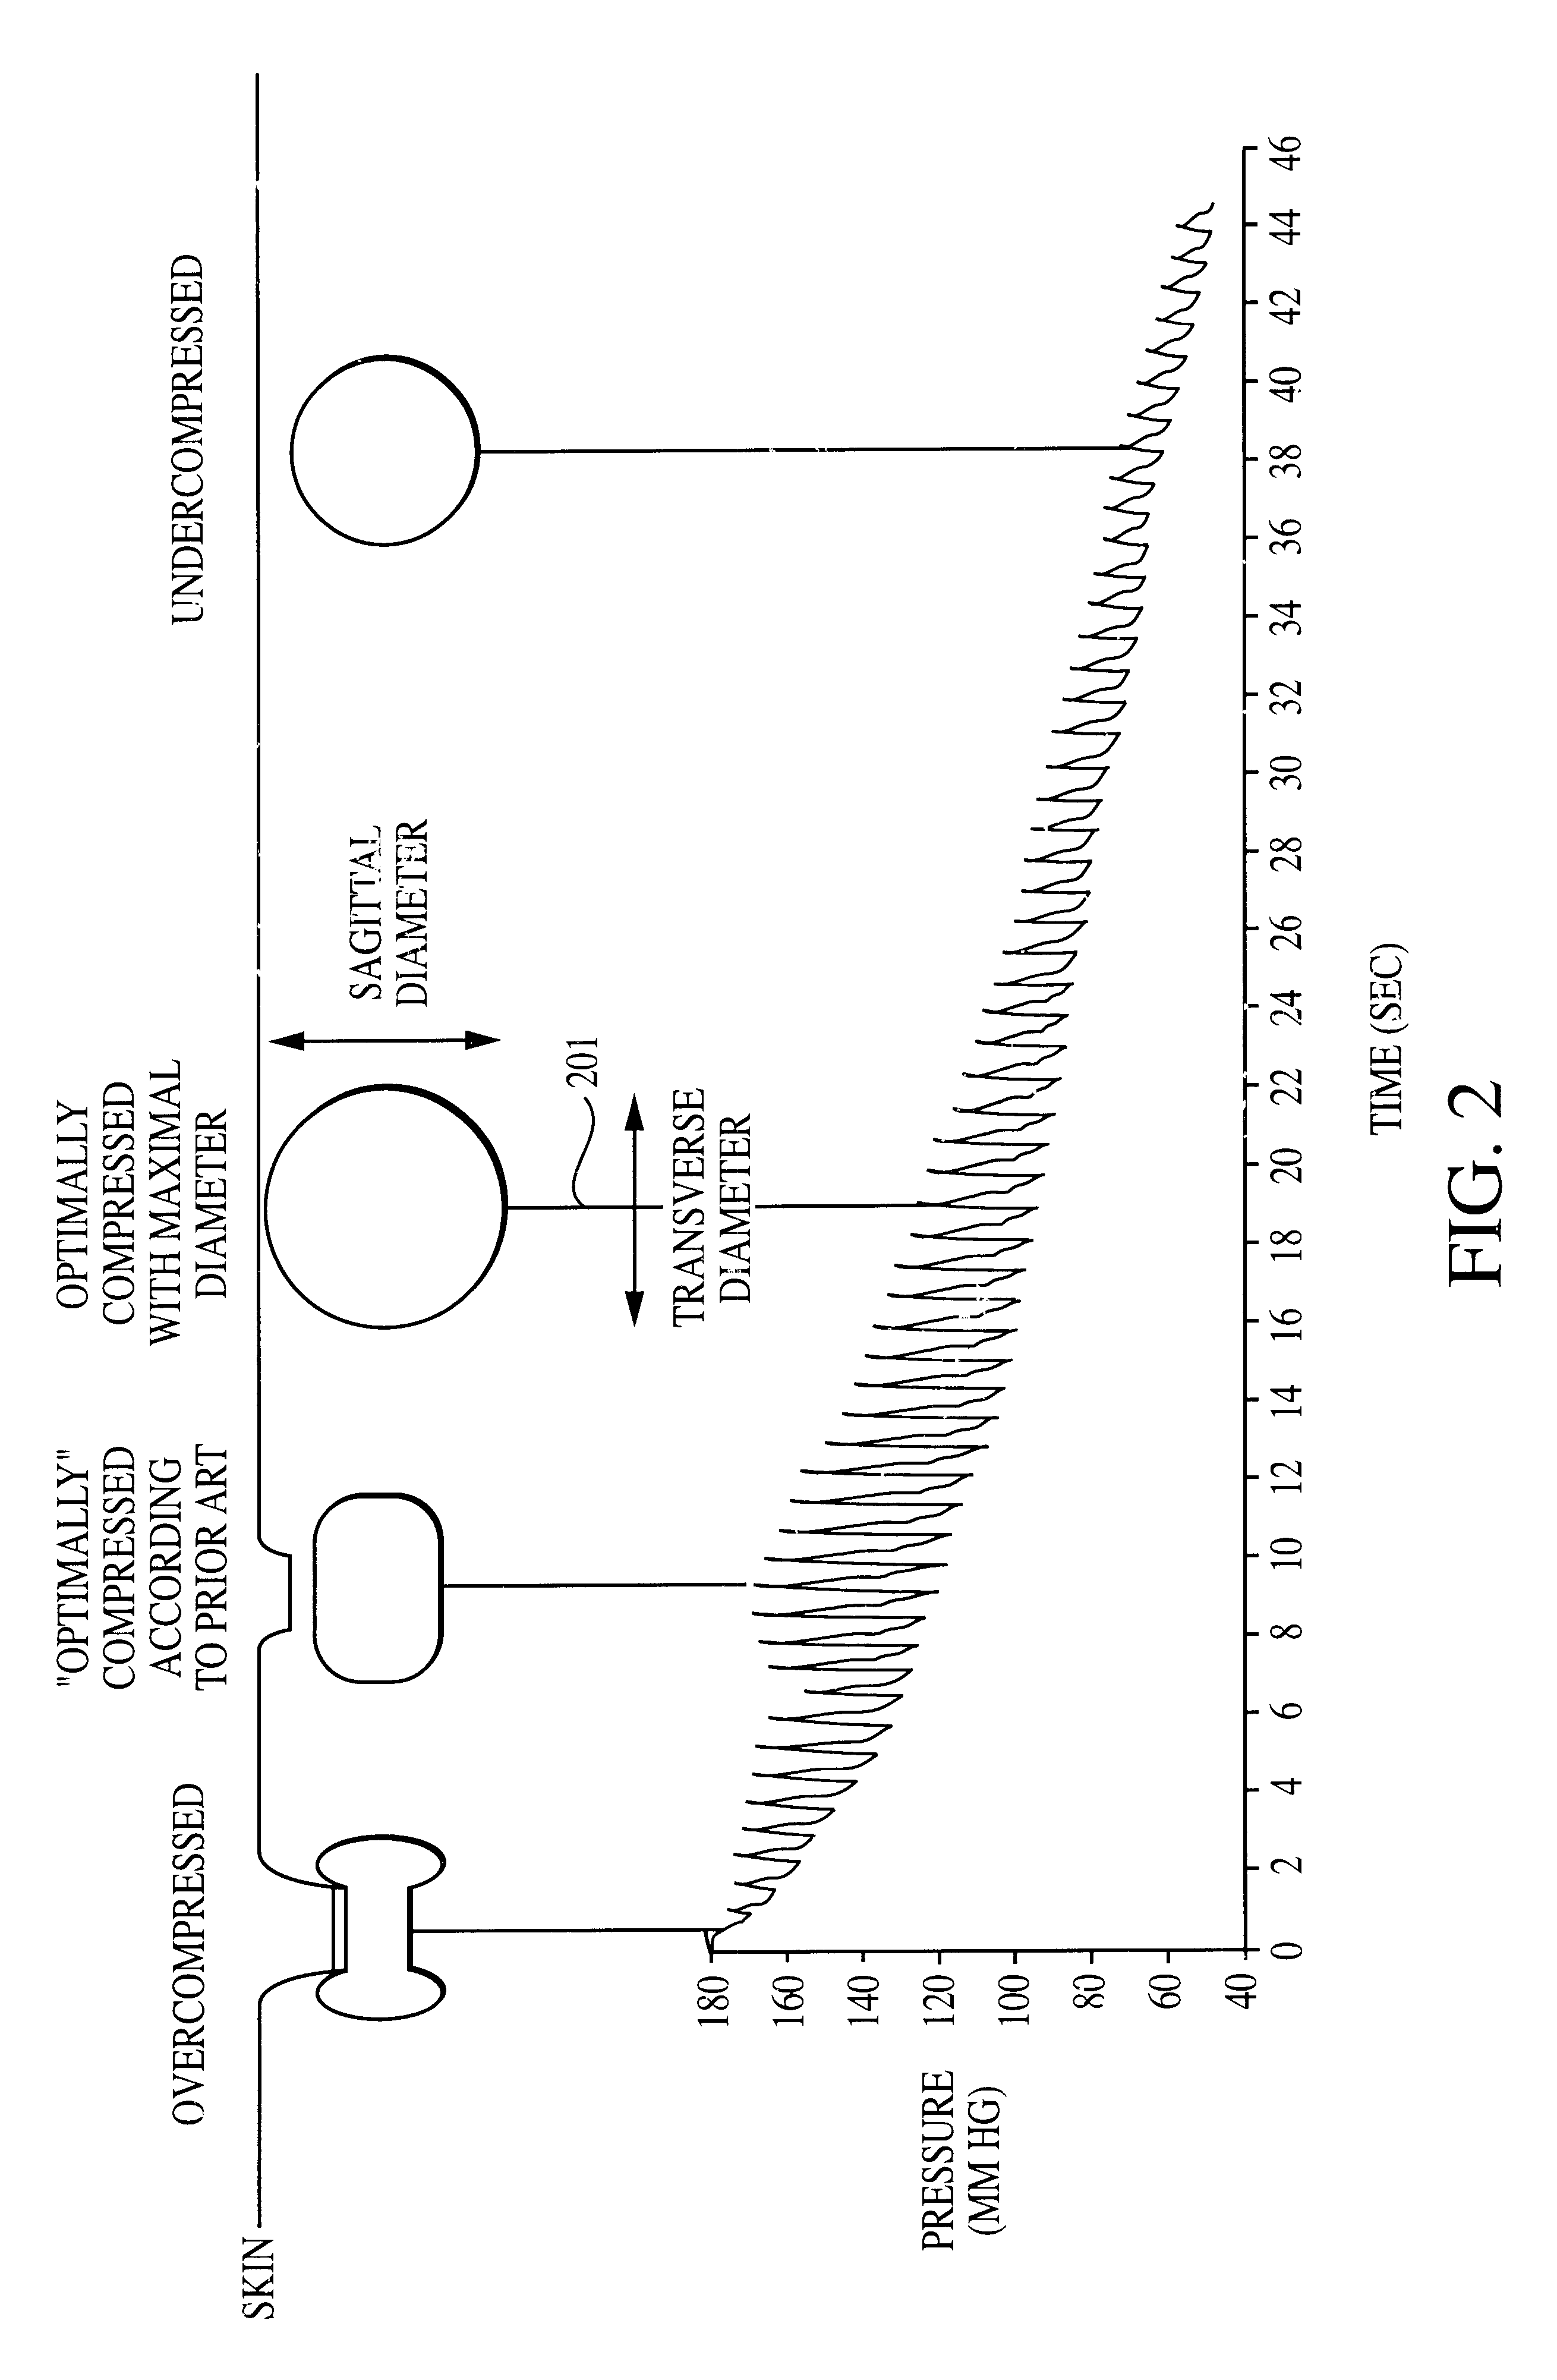 Method and apparatus for the noninvasive determination of arterial blood pressure